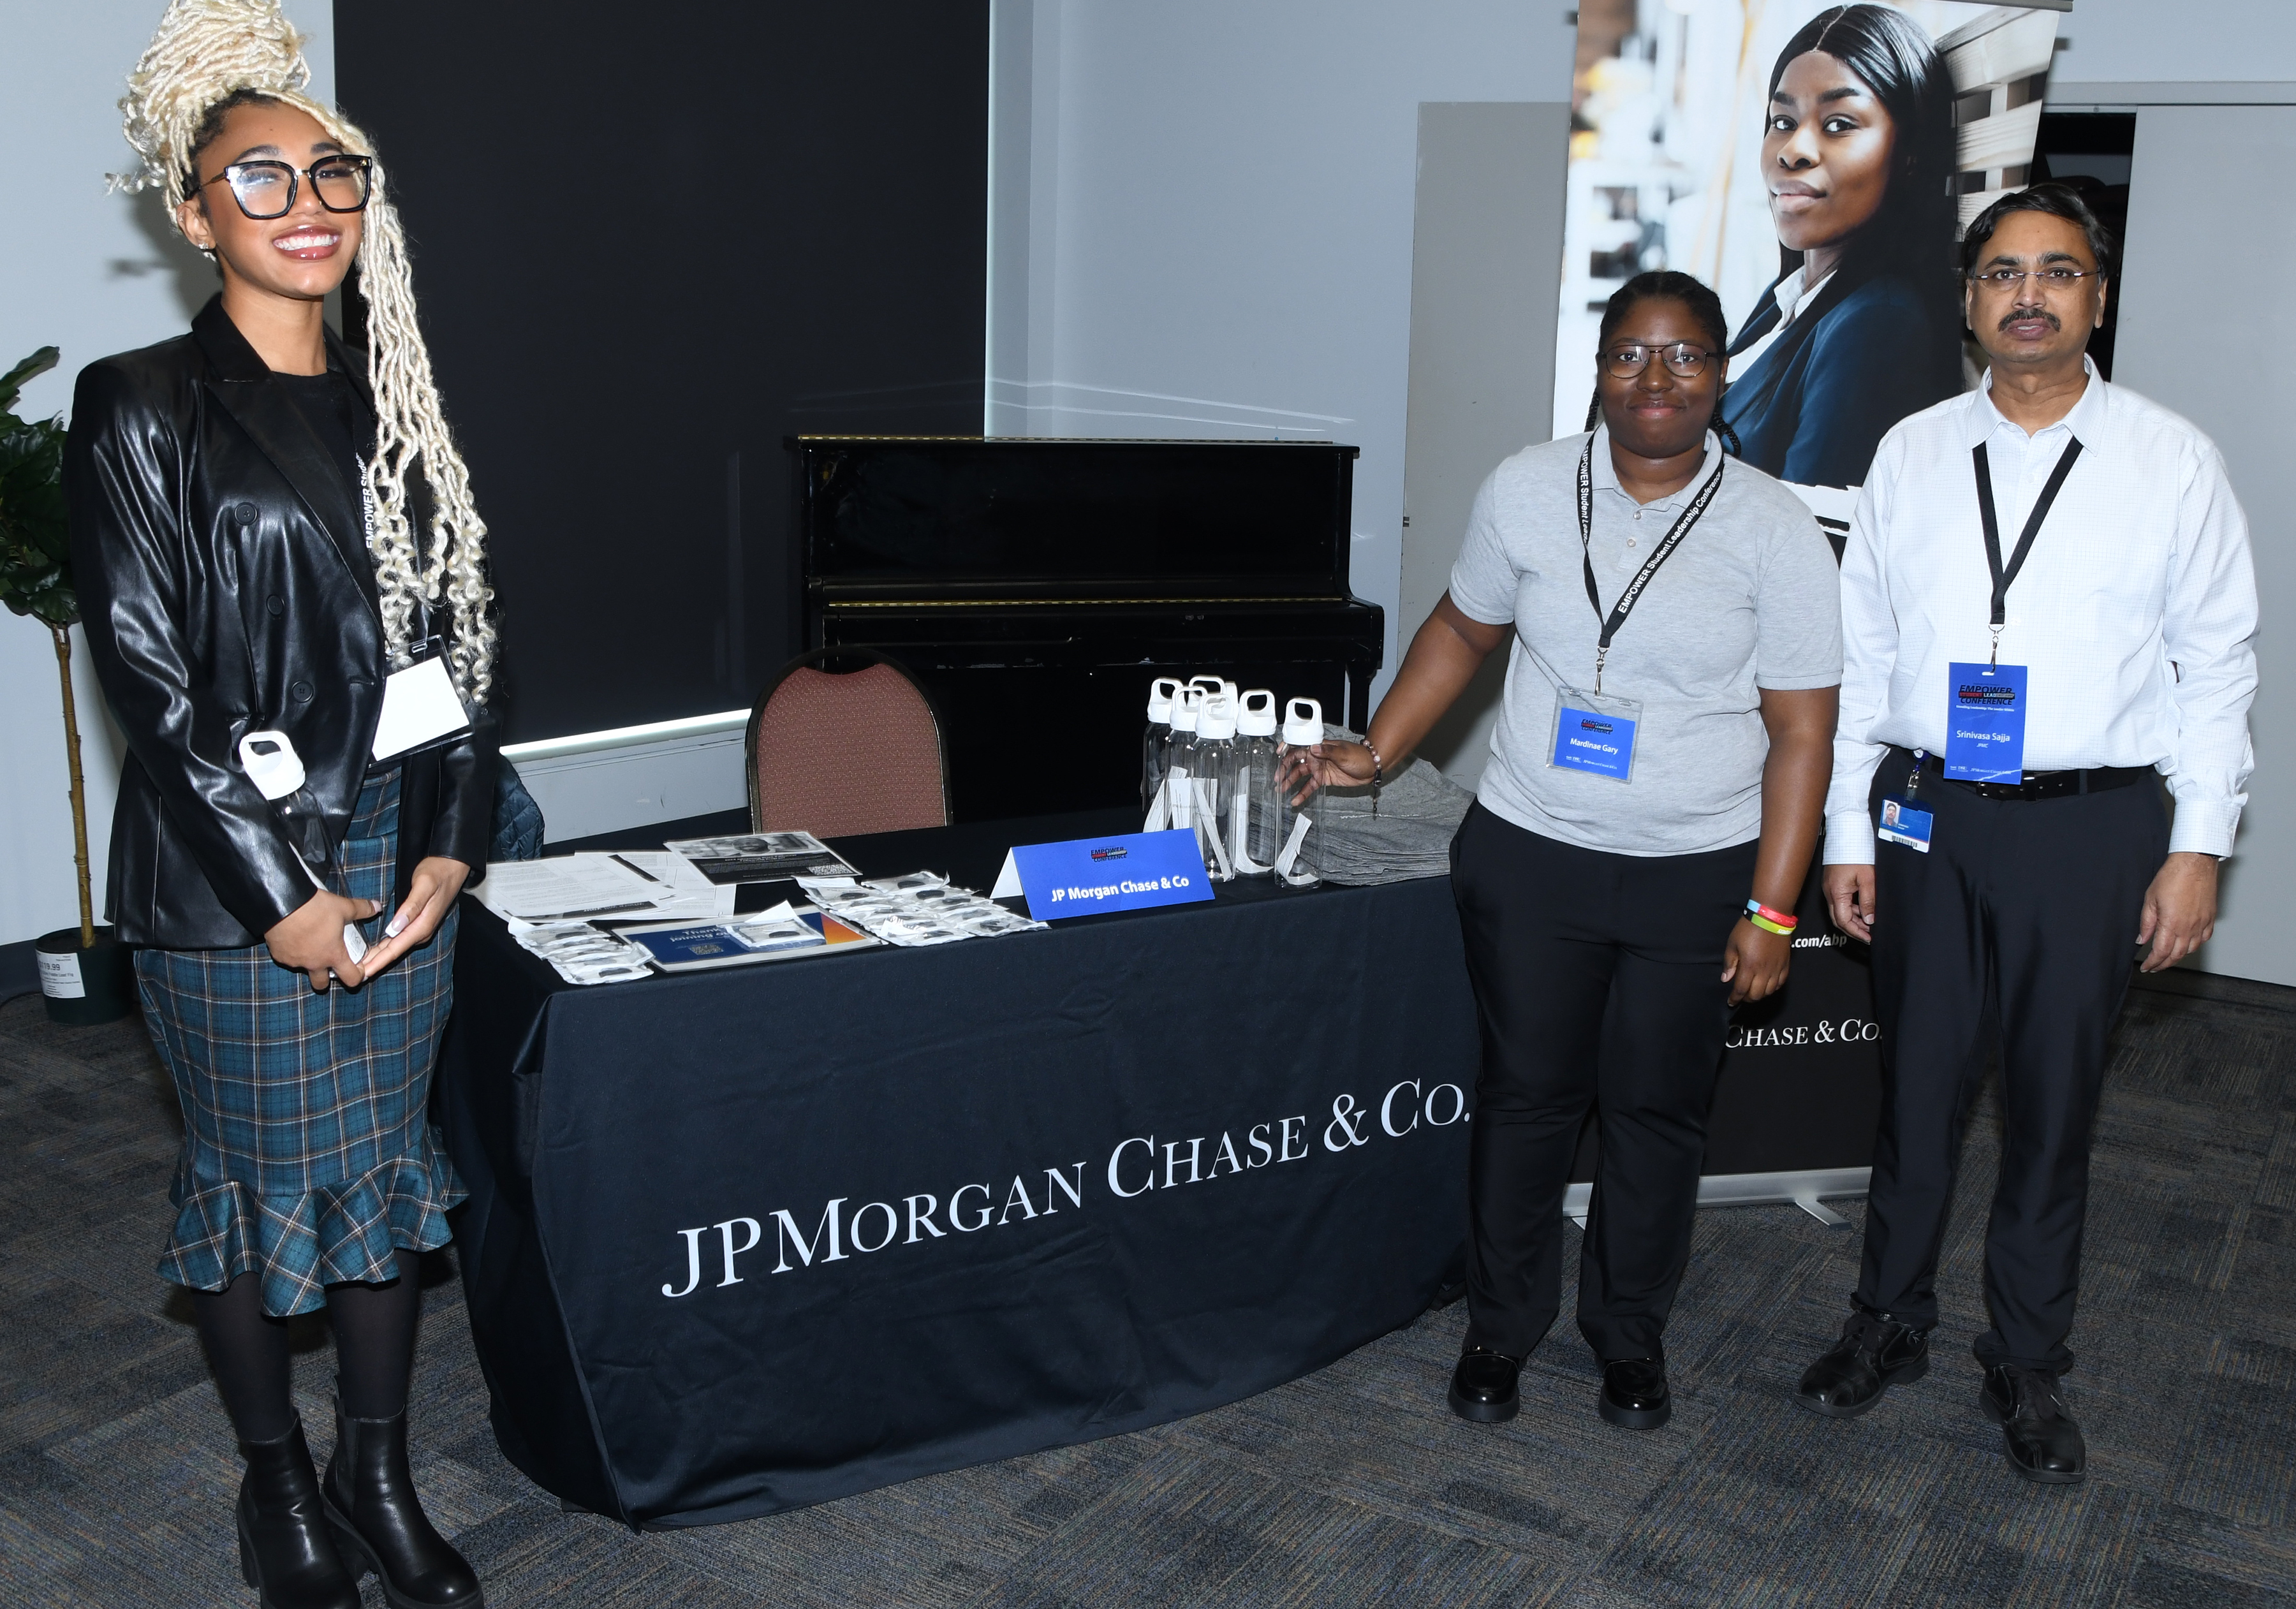 Two student pose with a representative of JP Morgan Chase, which sponsor the event's Jan. 31 networking lunch.